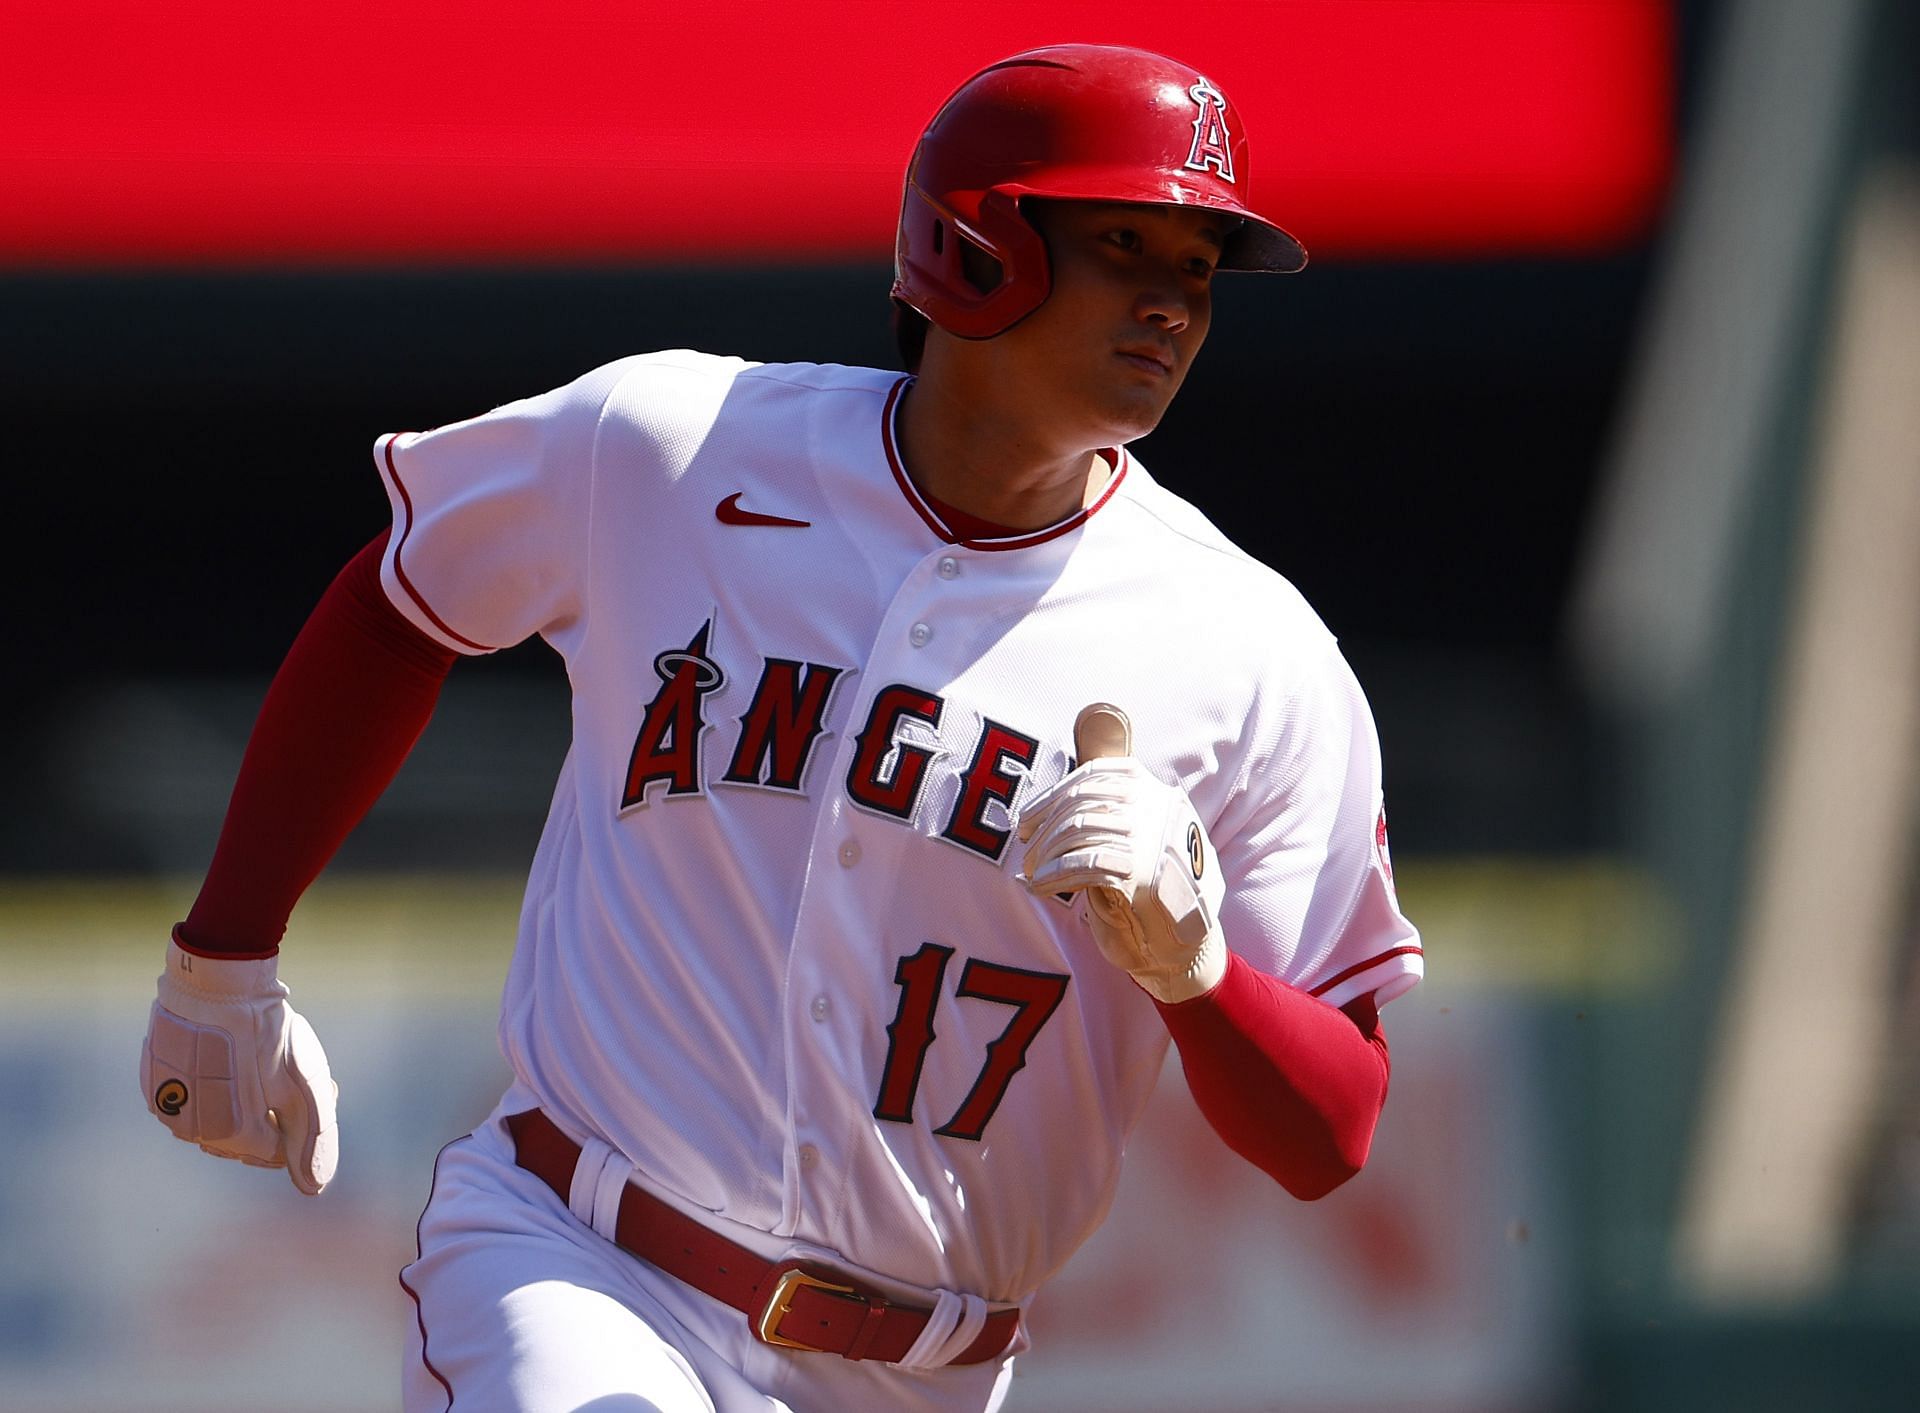 How old is Shohei Ohtani? Age and birthday explored